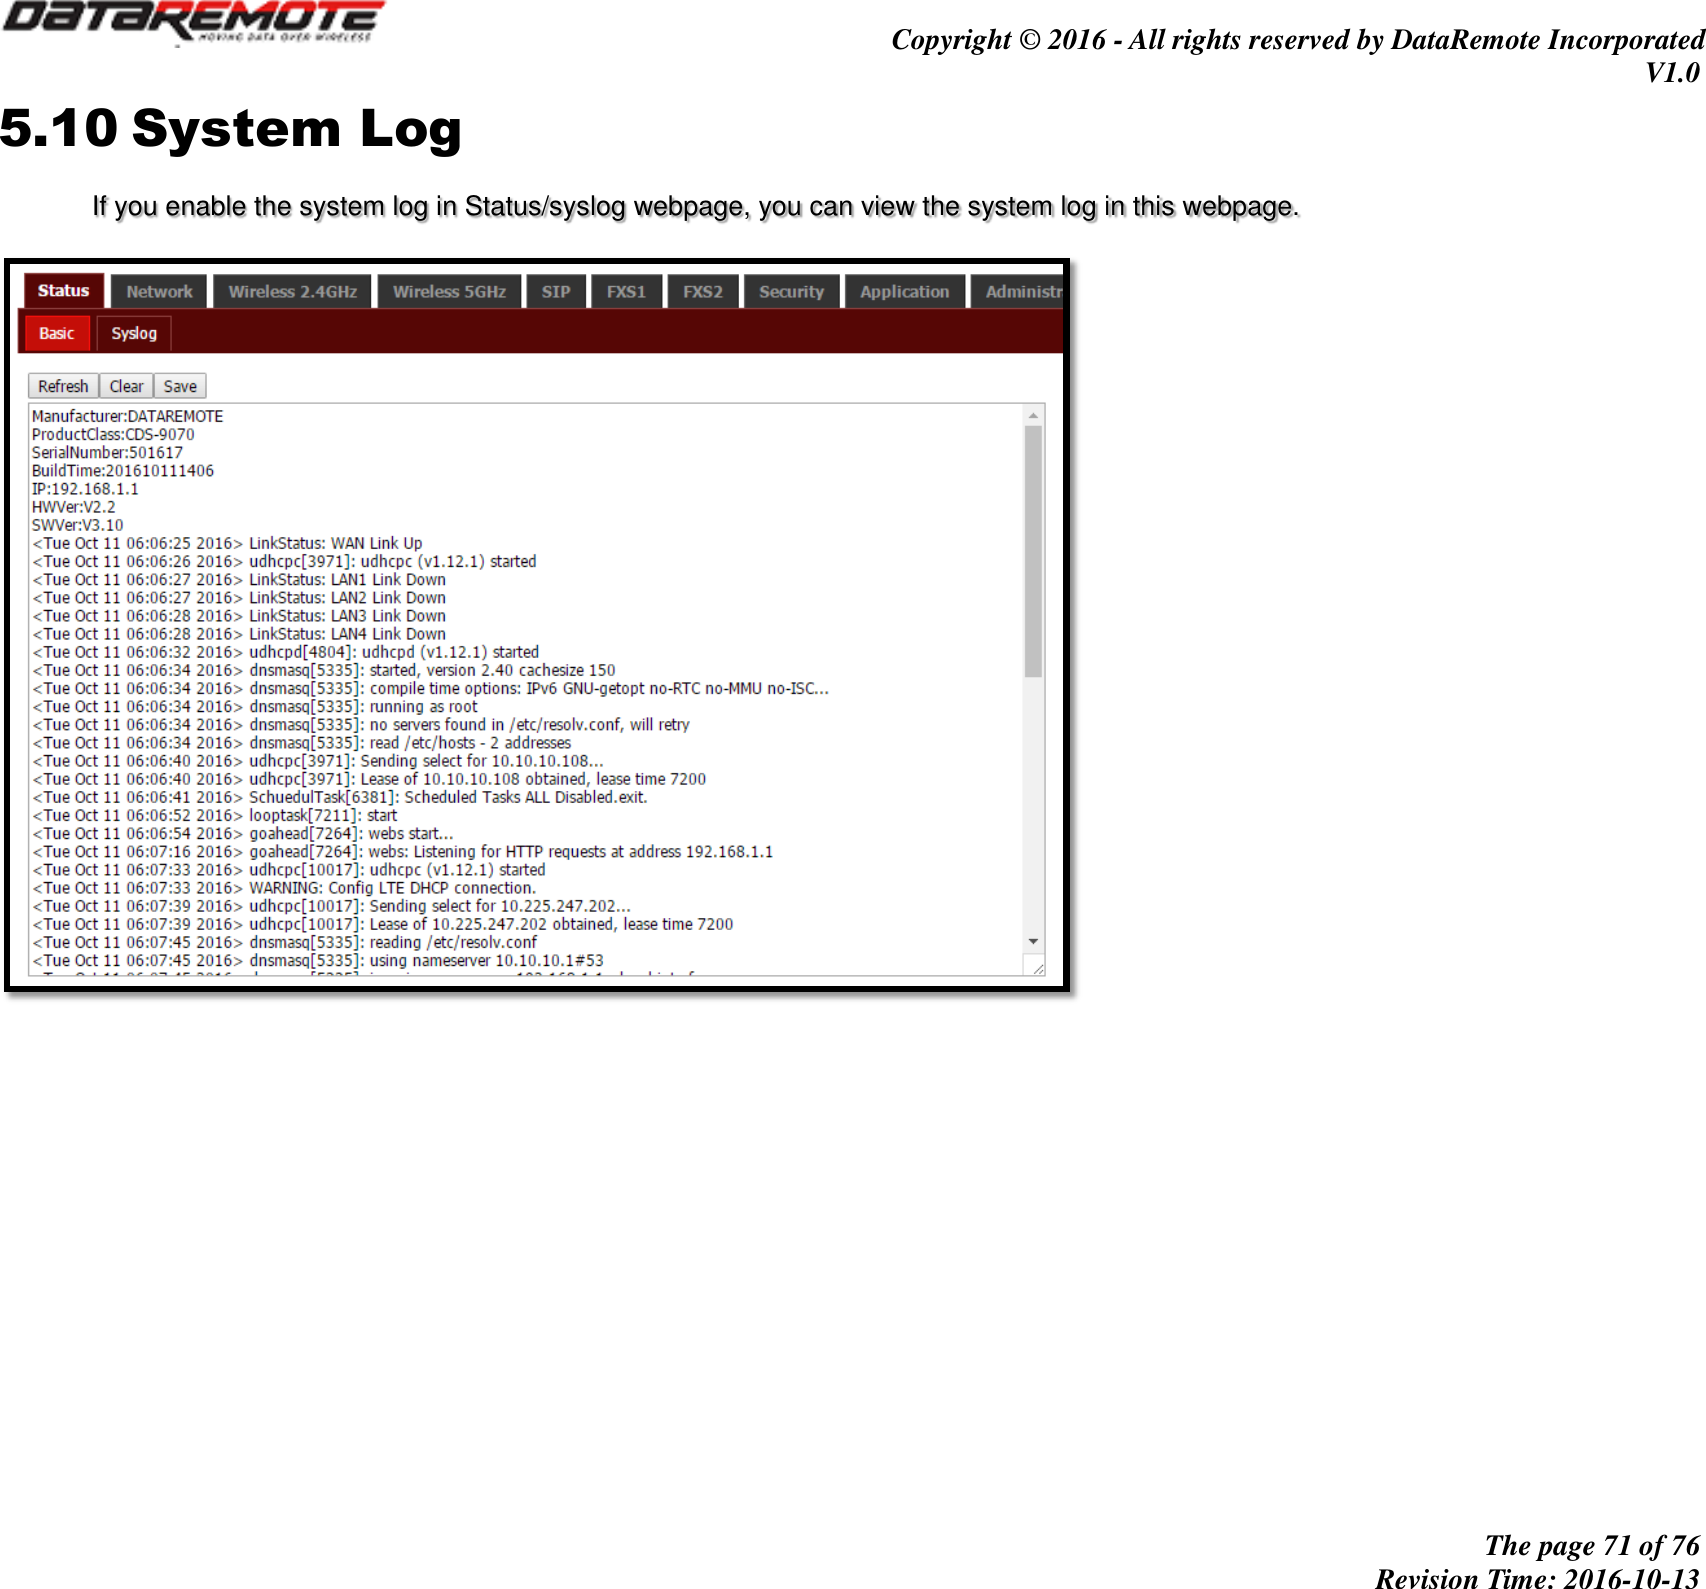 Copyright © 2016 - All rights reserved by DataRemote Incorporated V1.0 The page 71 of 76 Revision Time: 2016-10-13 5.10 System Log If you enable the system log in Status/syslog webpage, you can view the system log in this webpage. 